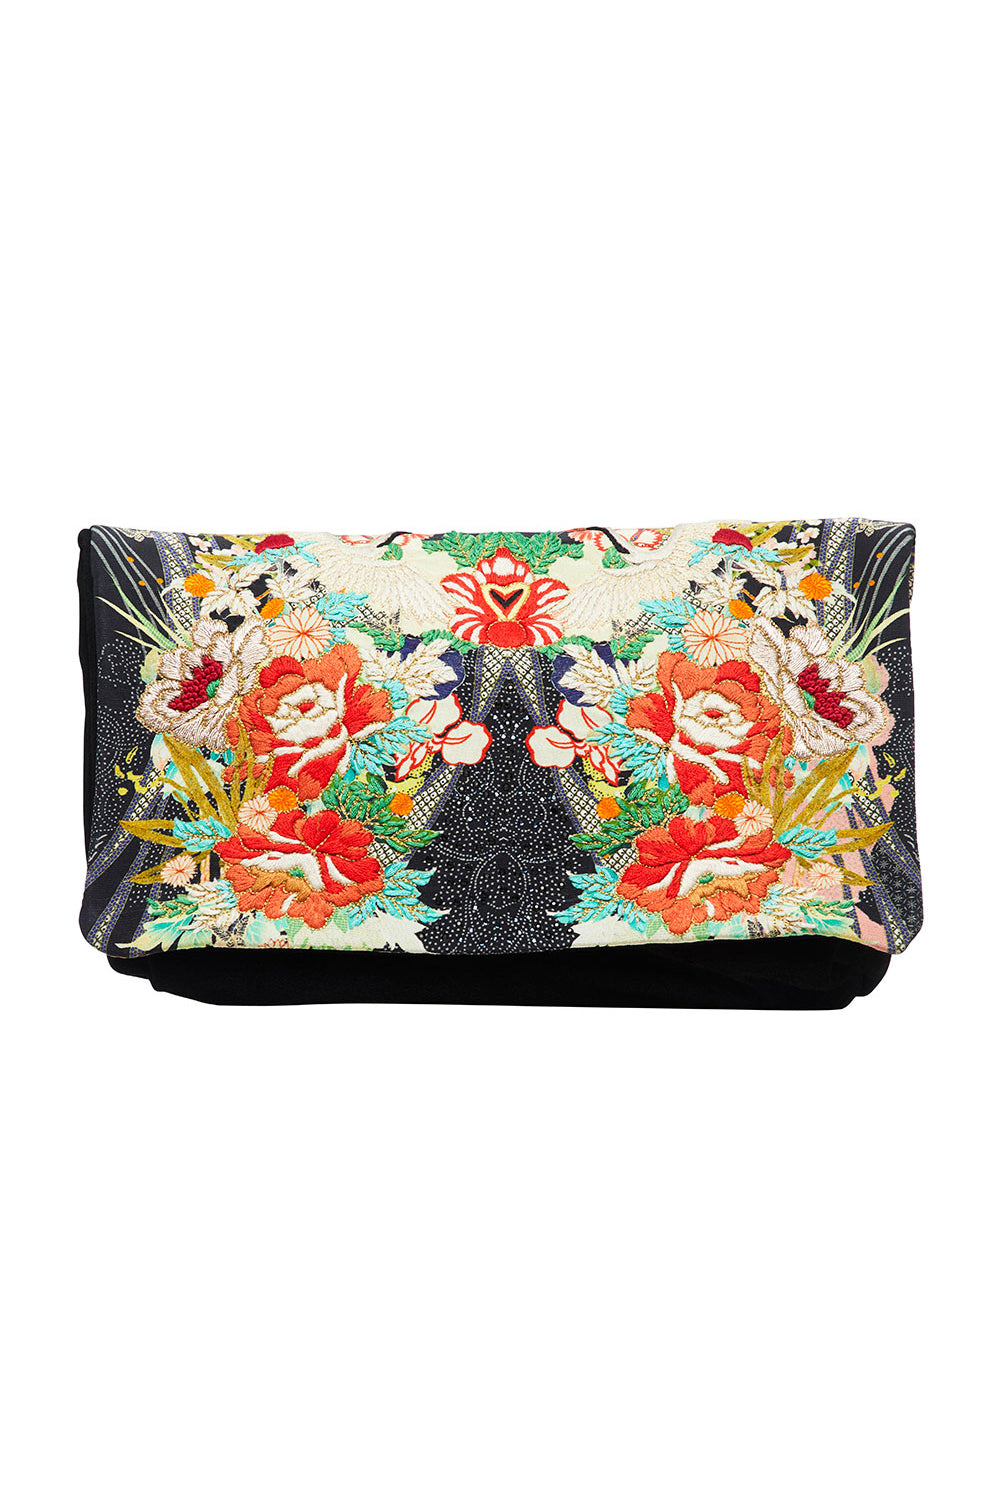 CAMILLA QUEEN OF KINDS EMBELLISHED CLUTCH